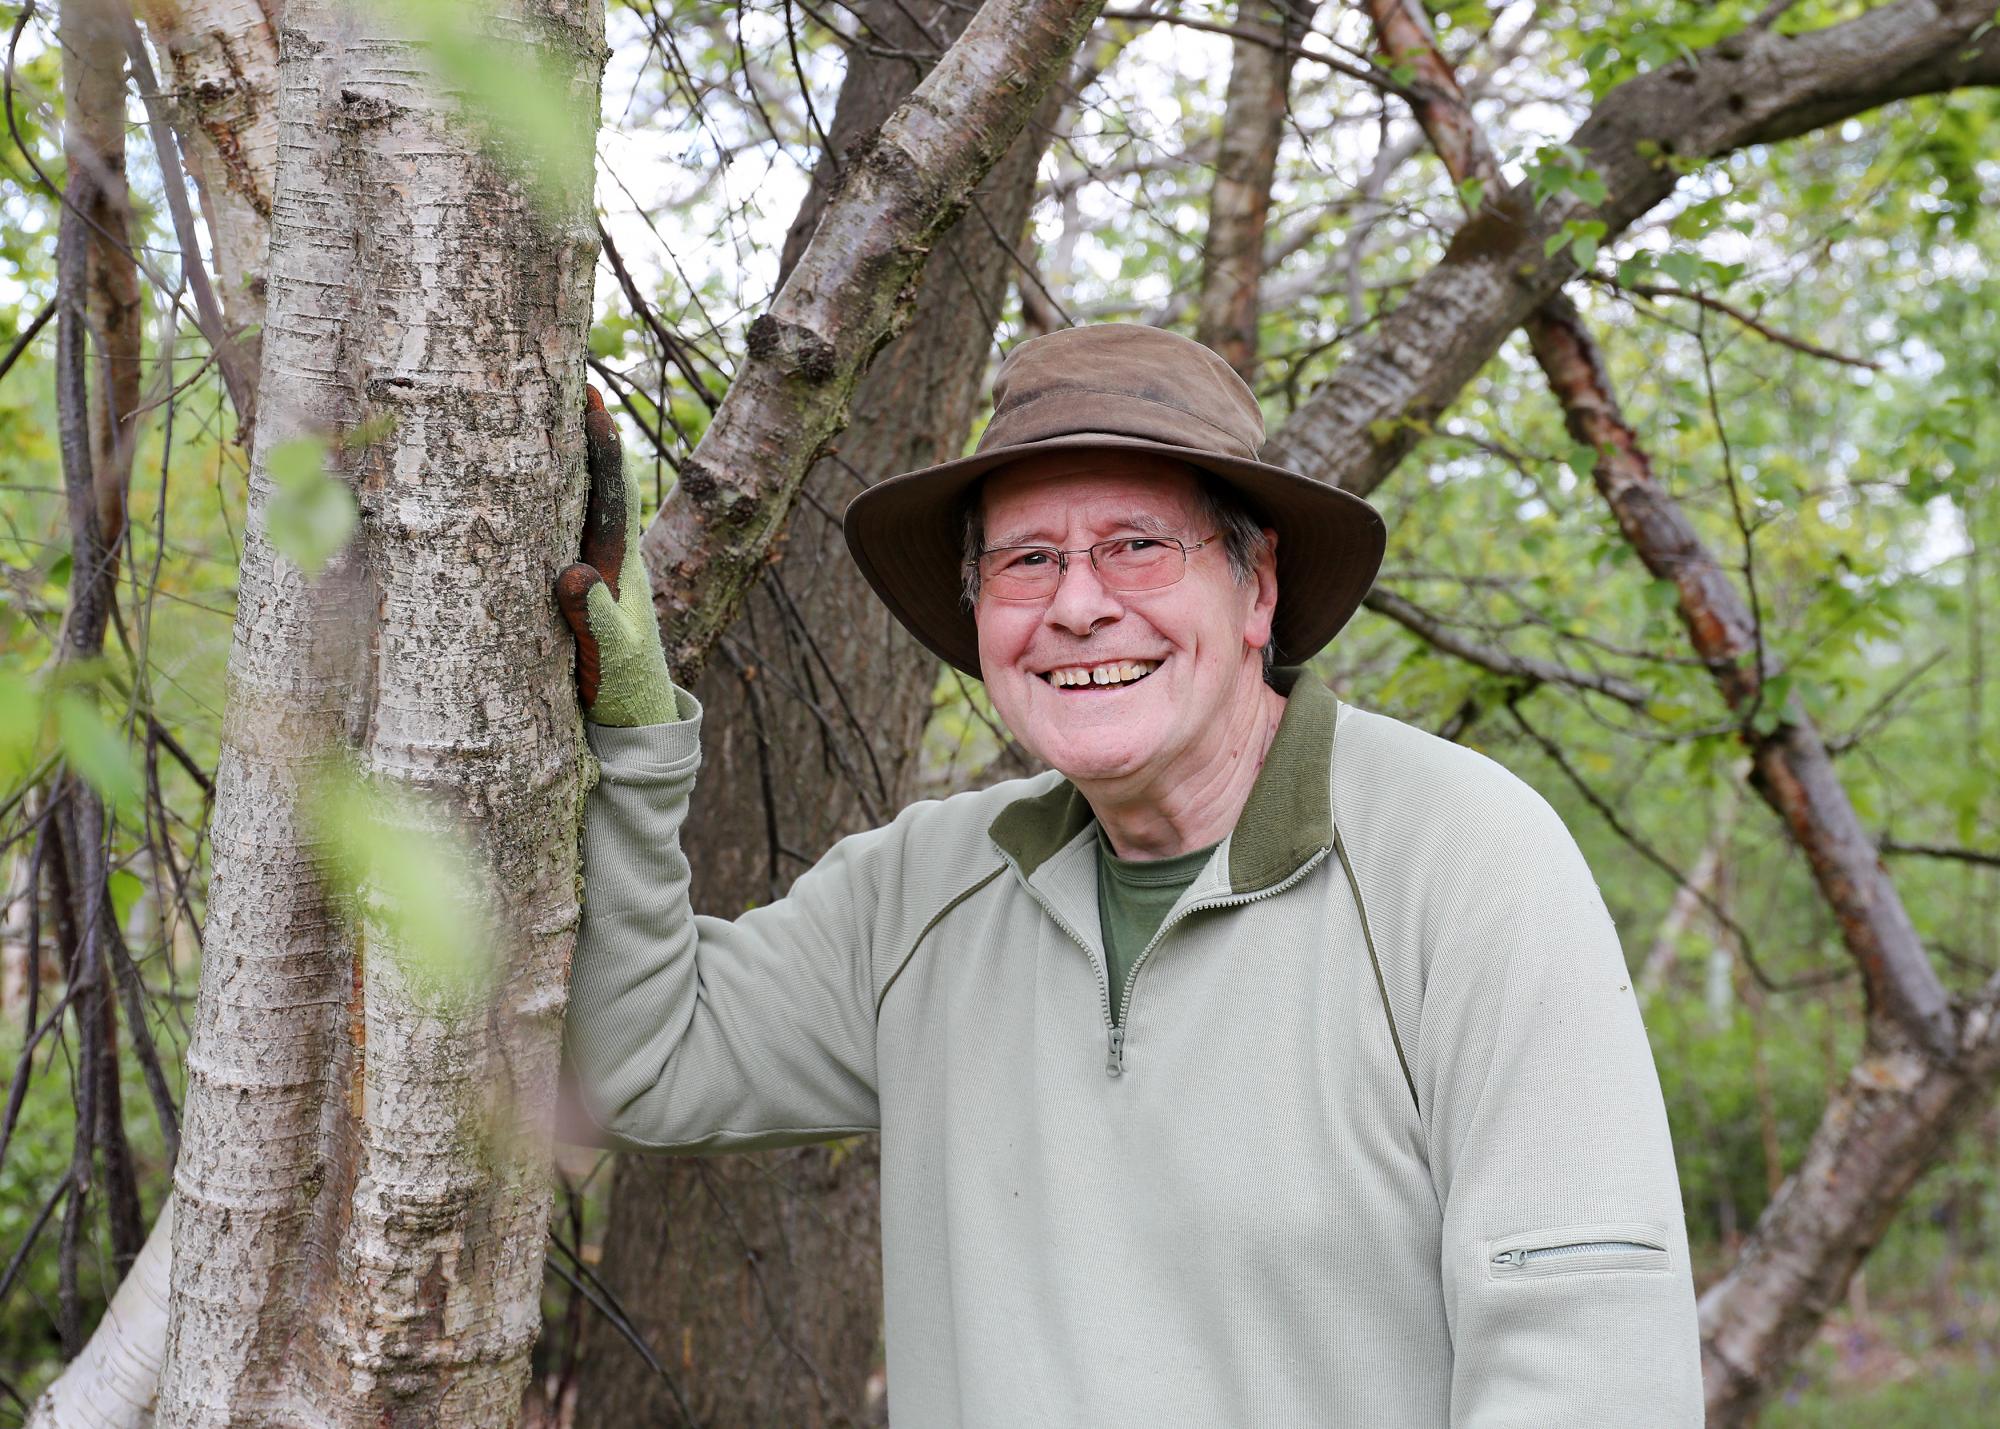 Volunteer Leader Alan smiling next to a tree in the Forest